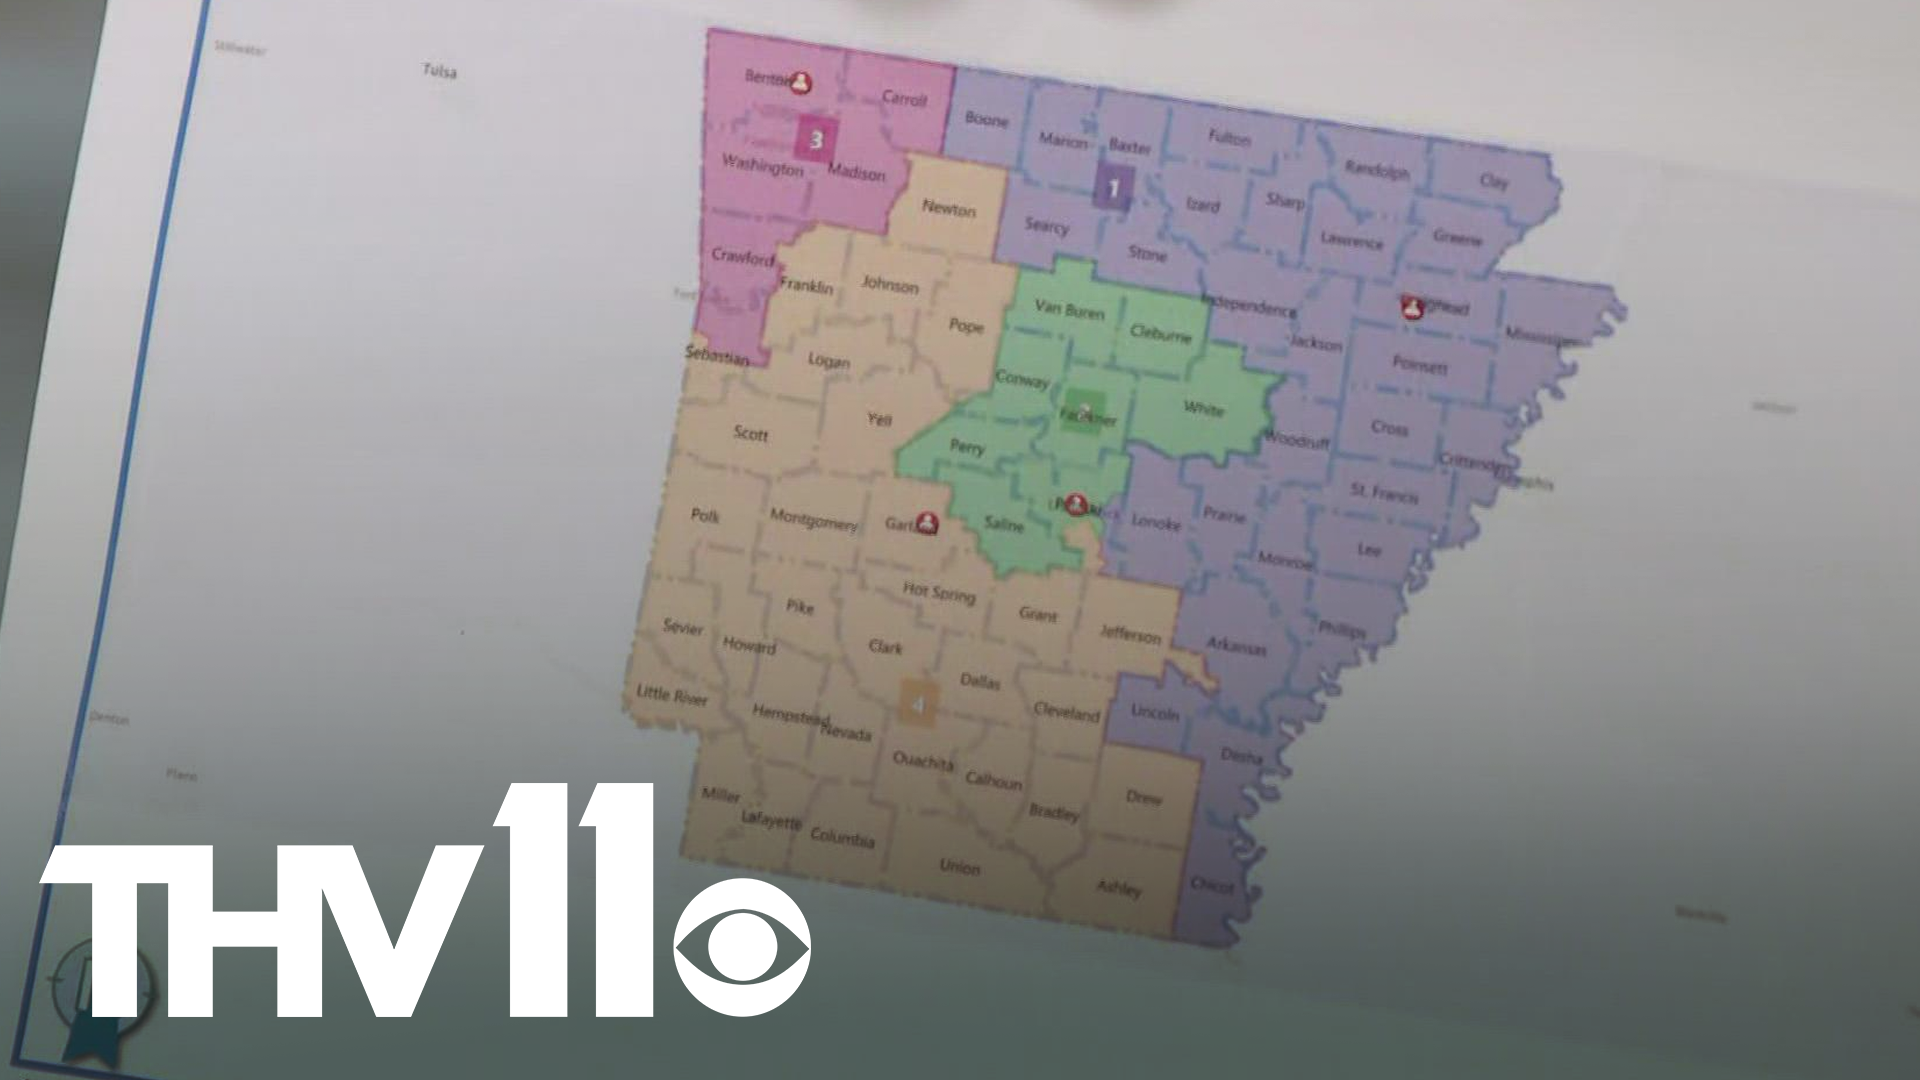 After the Arkansas legislature created a new redistricting map, notably separating Pulaski County into two districts, Hutchinson said it "raises some concerns."